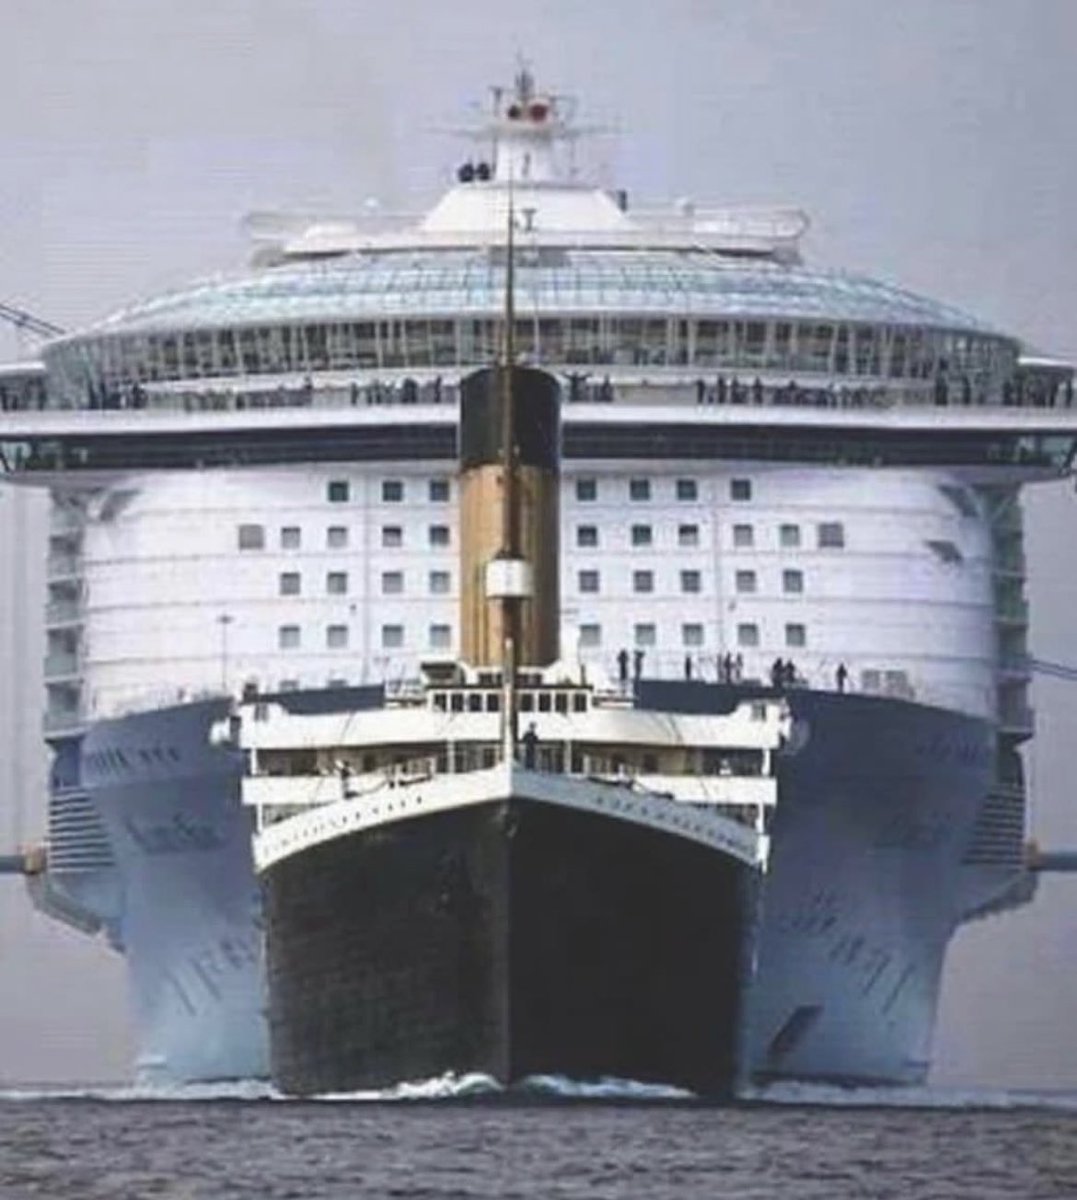 A size comparison between the Titanic and a modern cruise ship.

When Titanic was constructed, it represented an impressive feat for its time and held the distinction of being the largest ship in the world. Accommodating a total of 3,353 passengers, including 900 crew members,